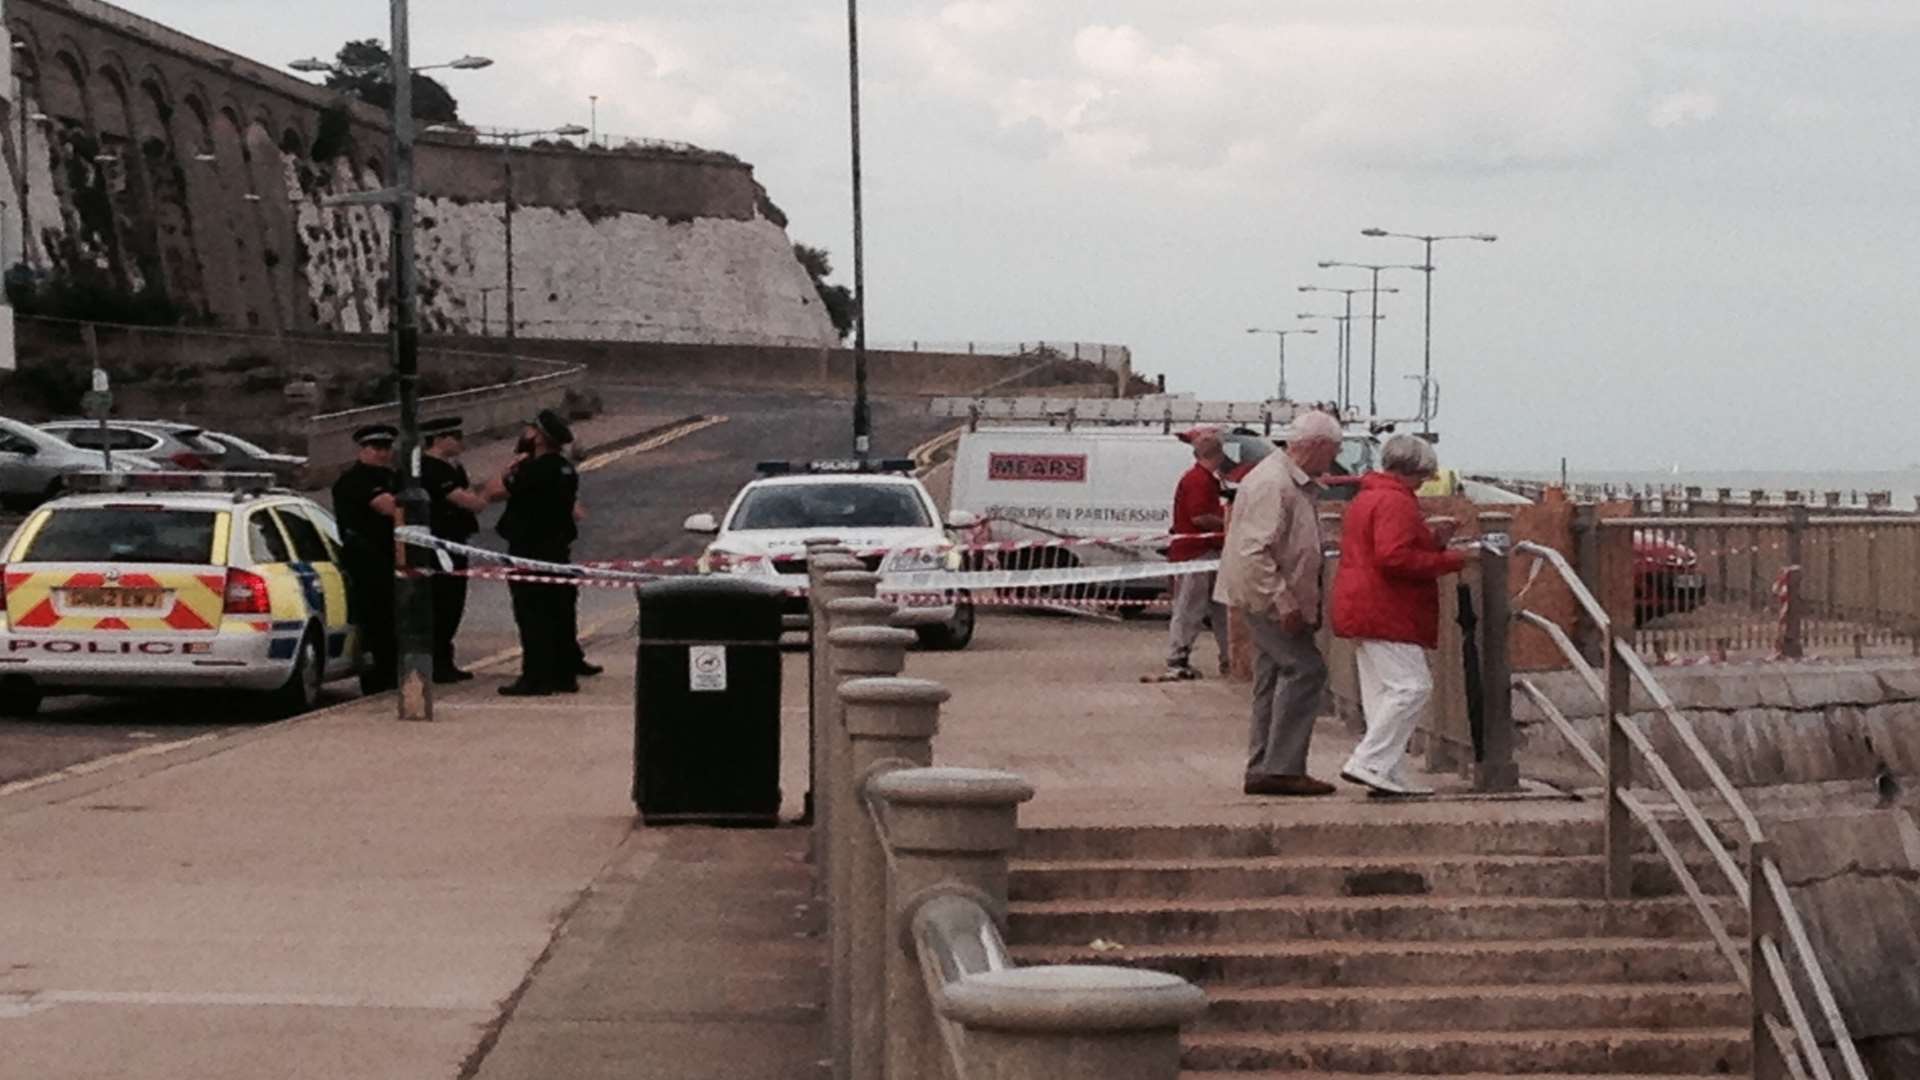 A car crashed through railings on to the beach in Ramsgate.